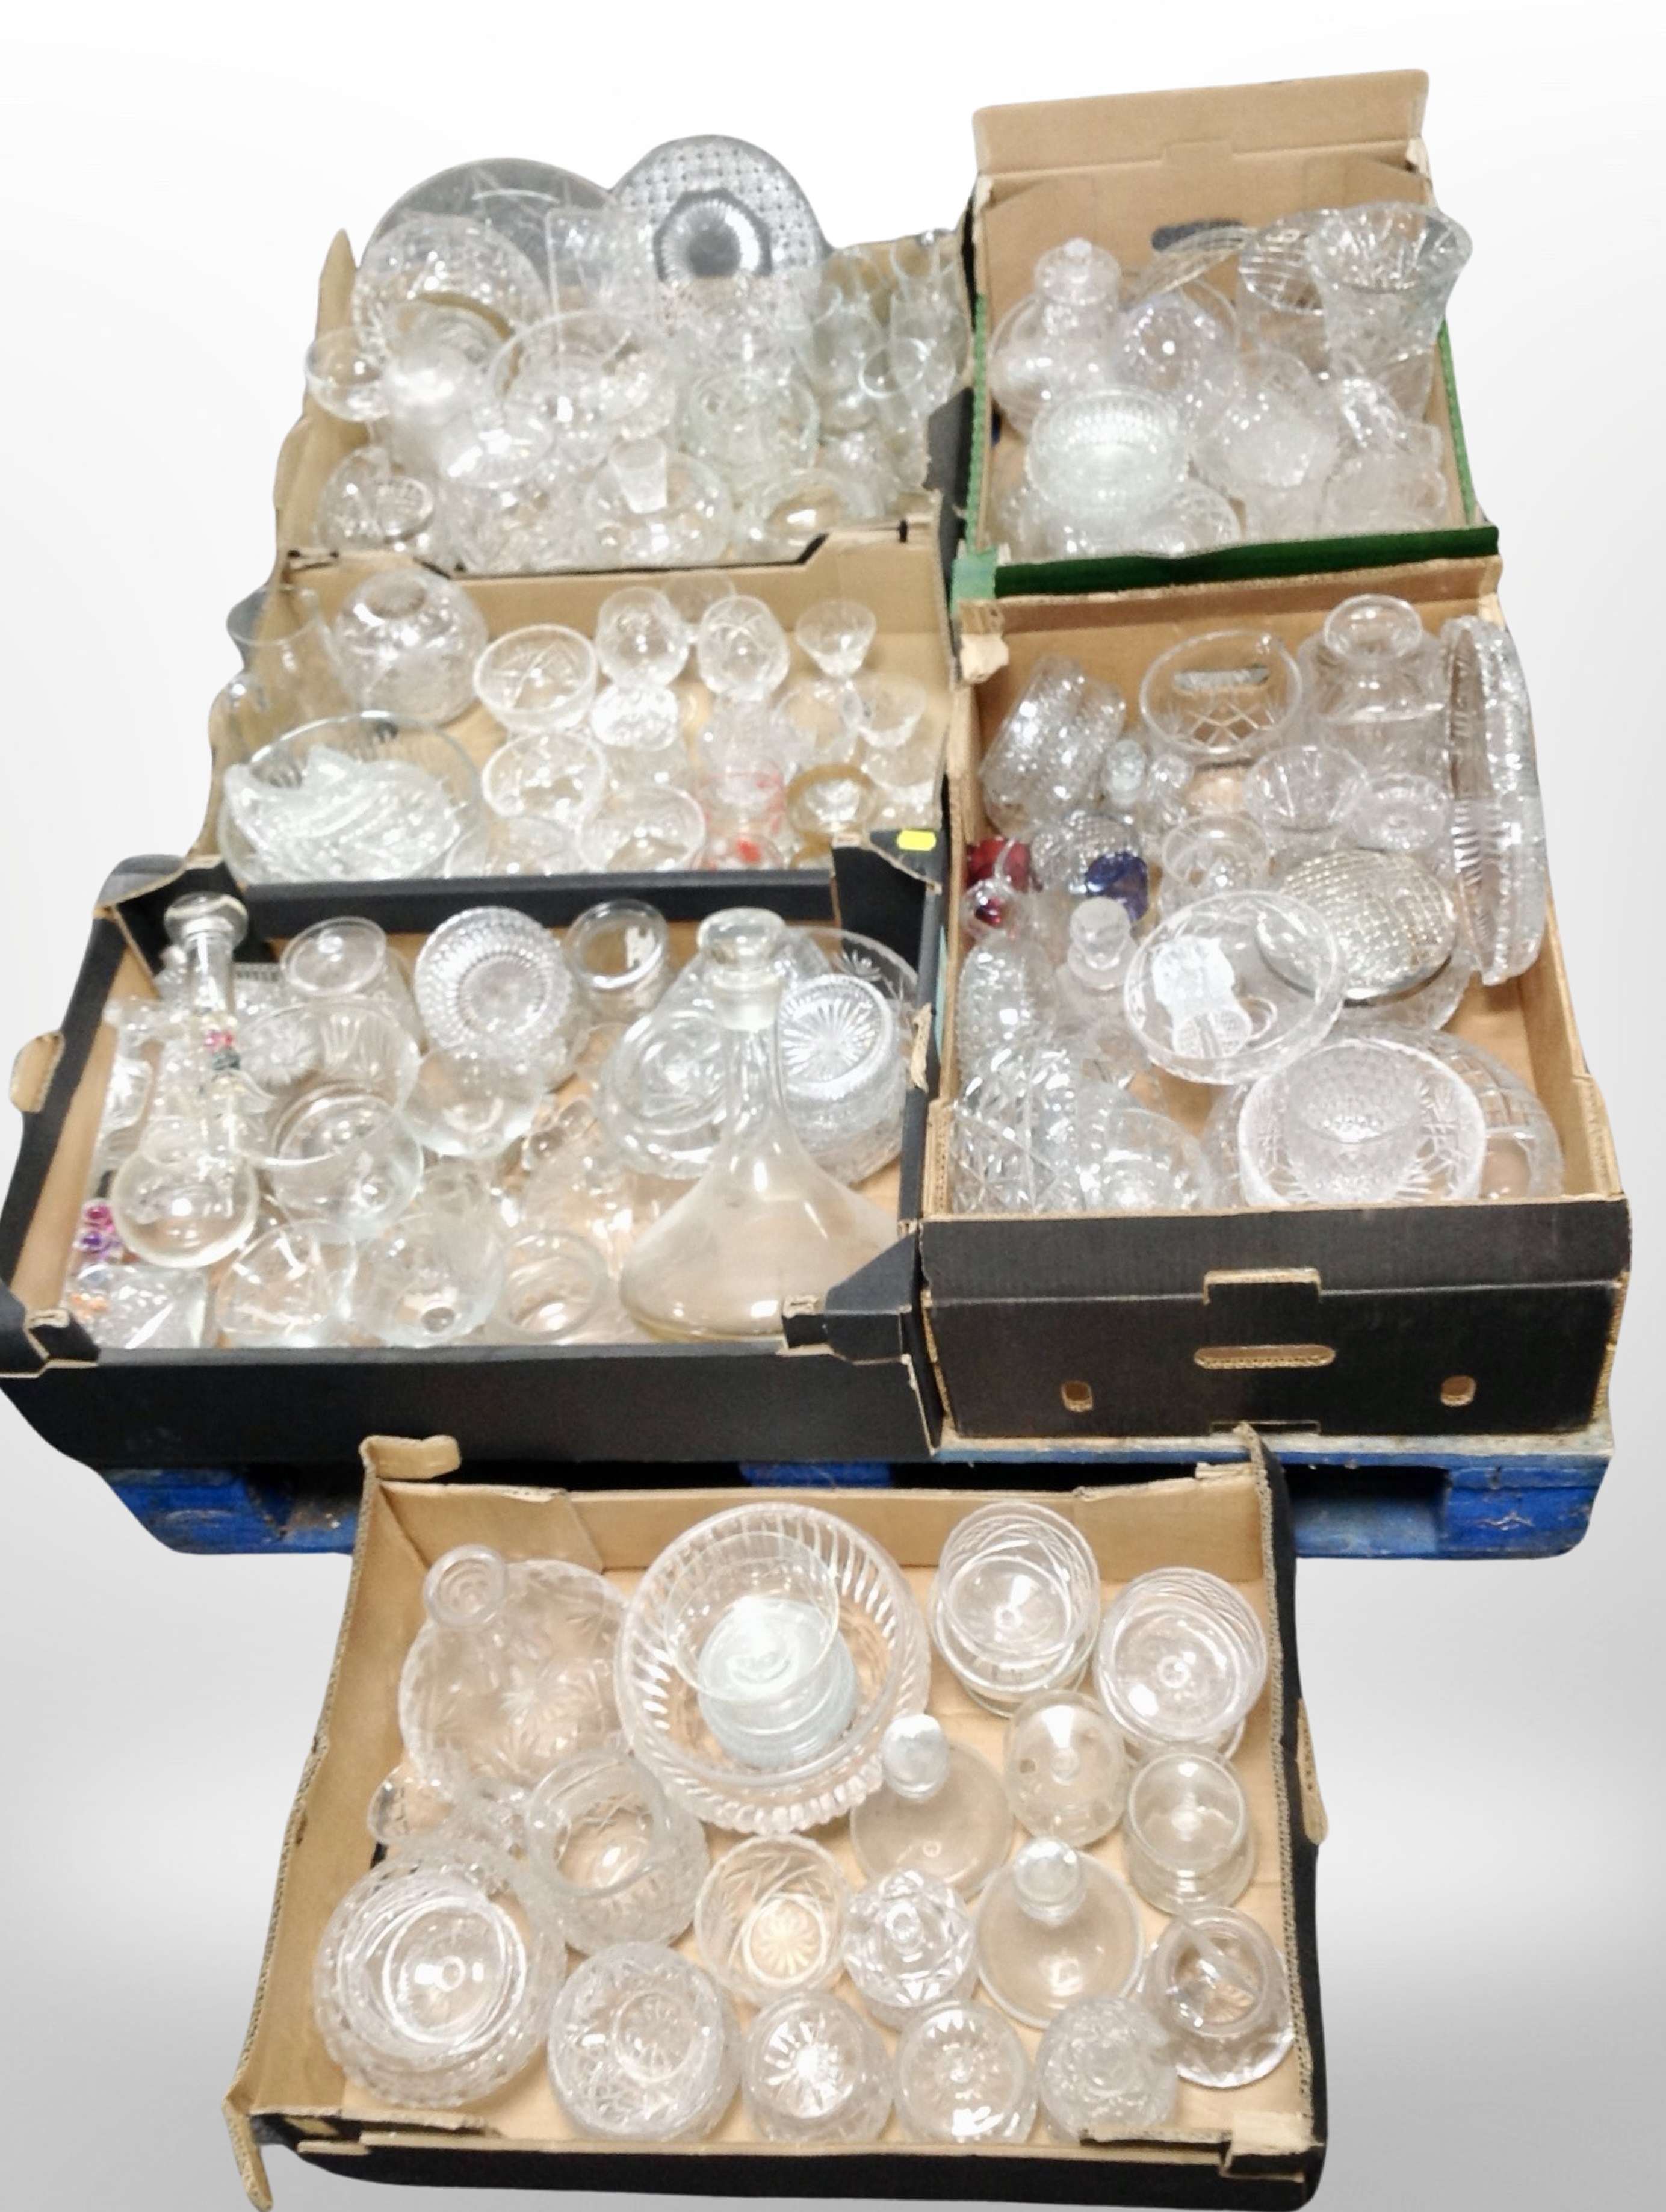 A pallet containing a large quantity of crystal and pressed glass